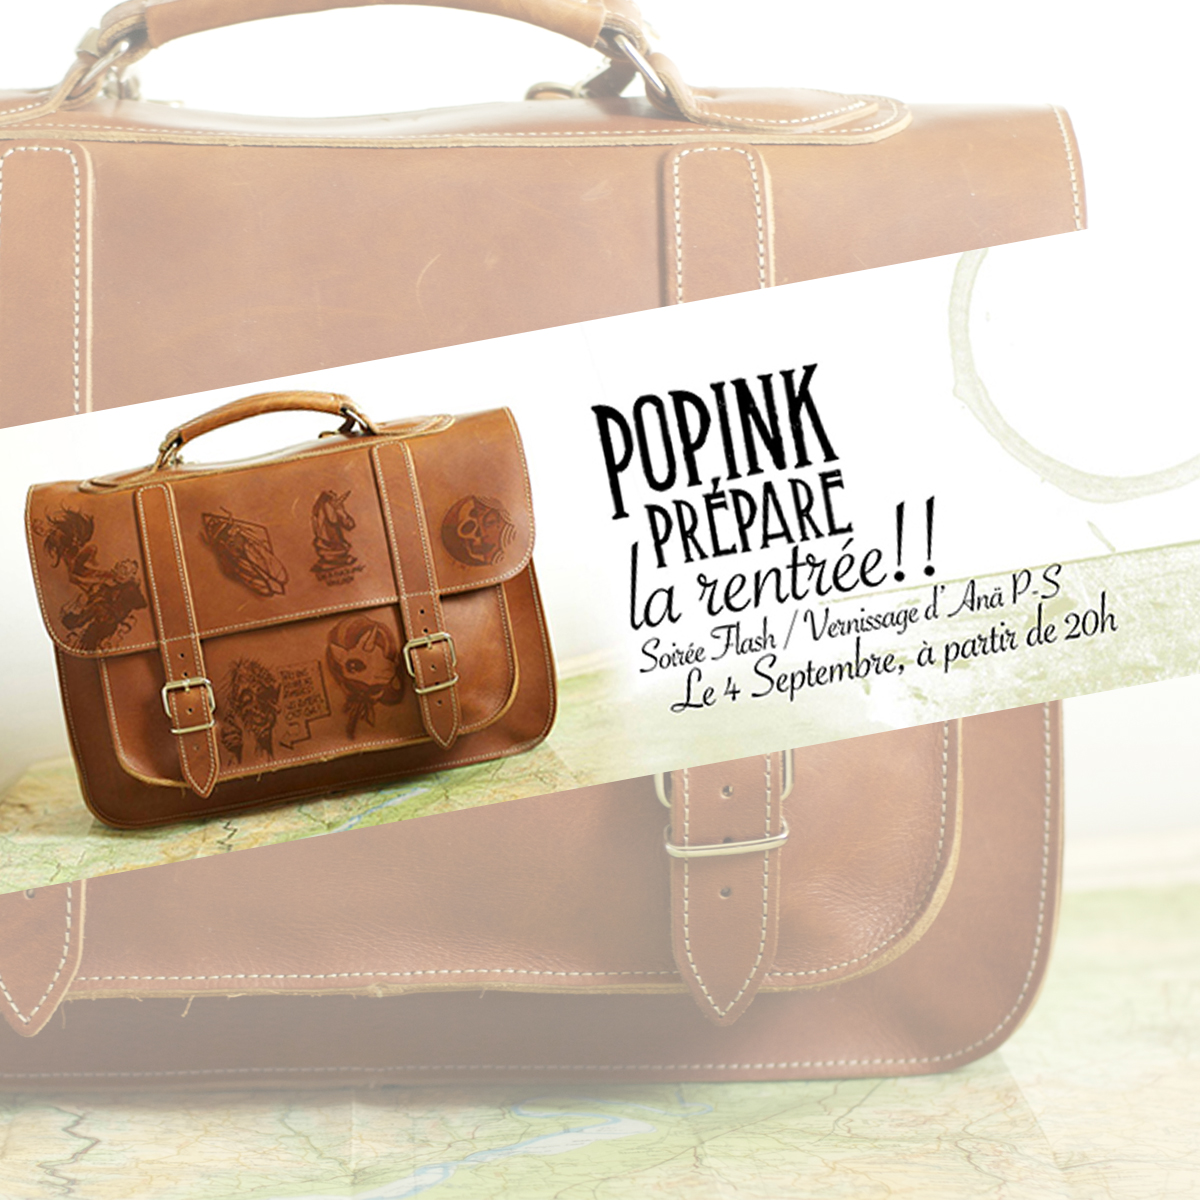 popink-soiree-rentree-marseille-agence-jones-and-co-VG